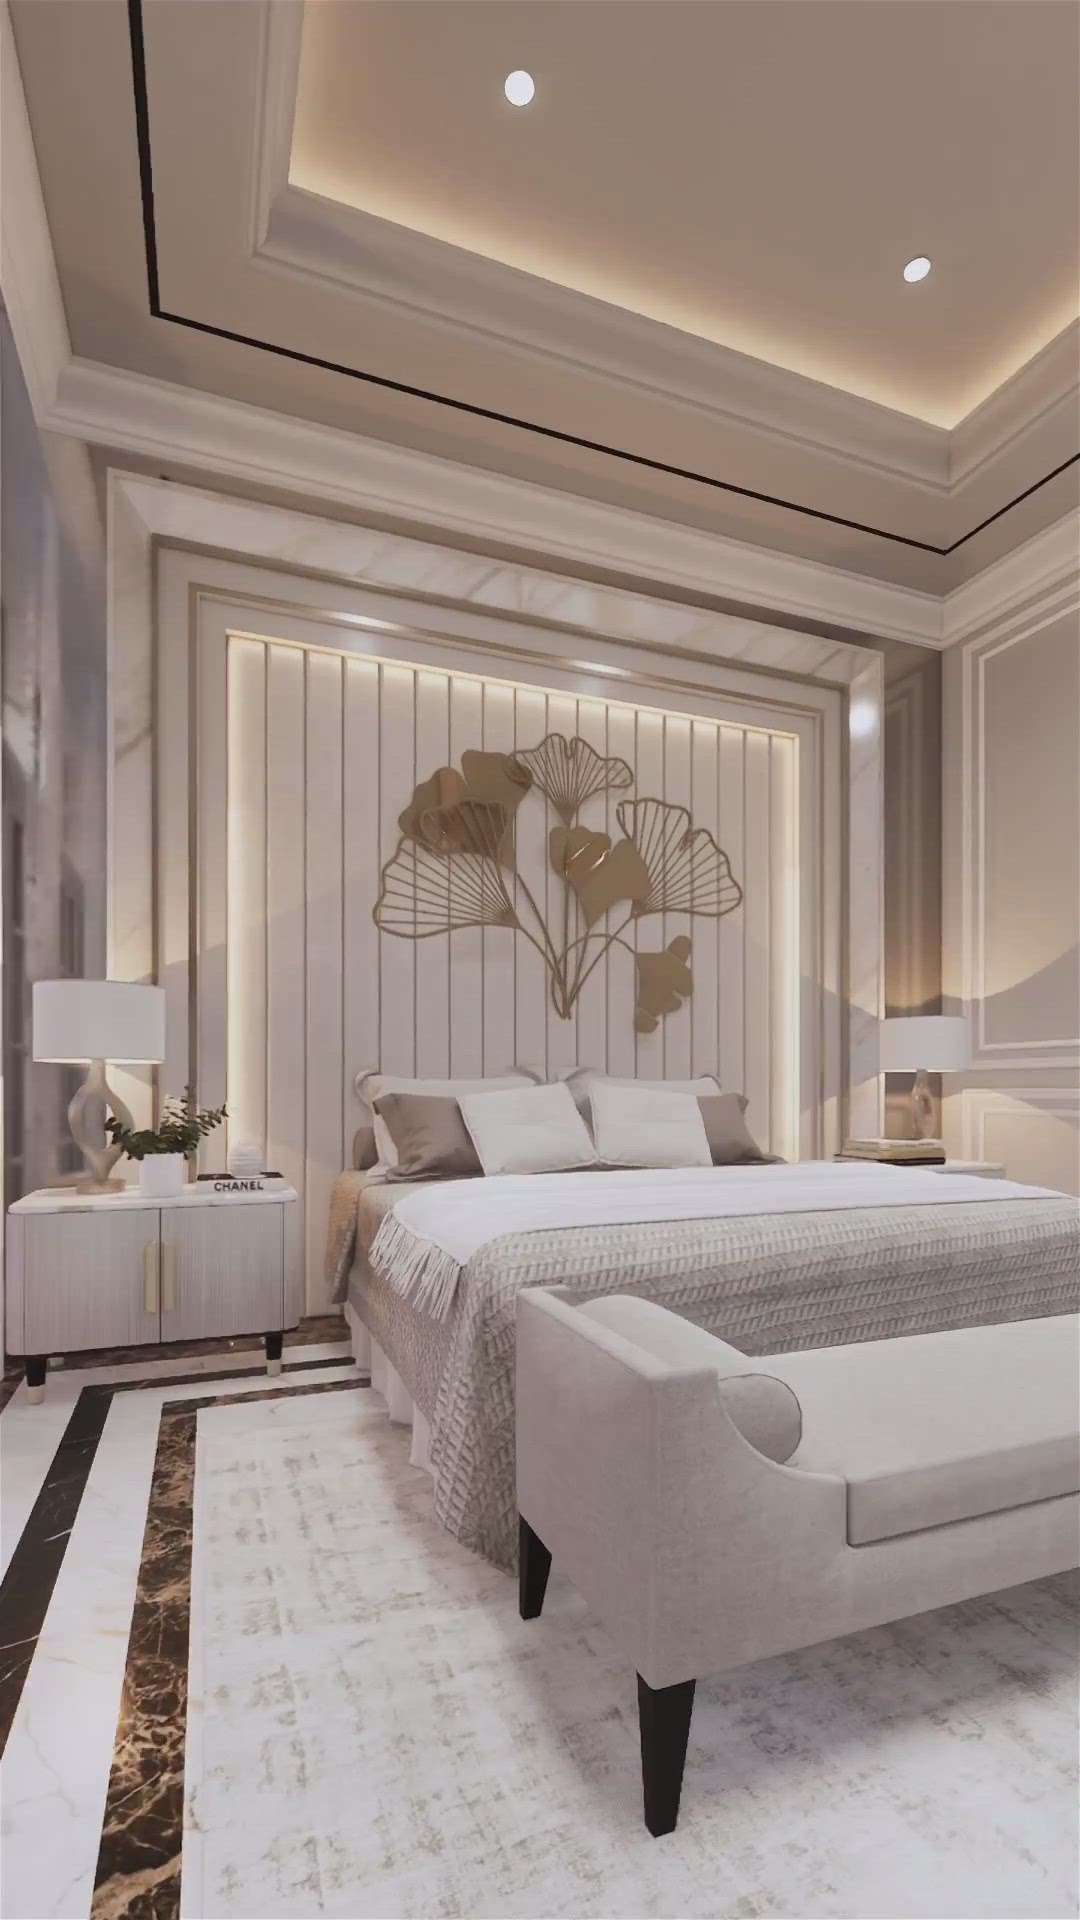 Bedroom Art At Budget 
-Comment Down Which Is your Favourite.
-Like, Share With Your Friends.
-Dm For Reasonable Rates.
-For Construction And Home Designs.
-We Do Vastu Work Also.
.
.
#BedroomDecor #HomeDecor #BedroomDesigns #Designs #3d